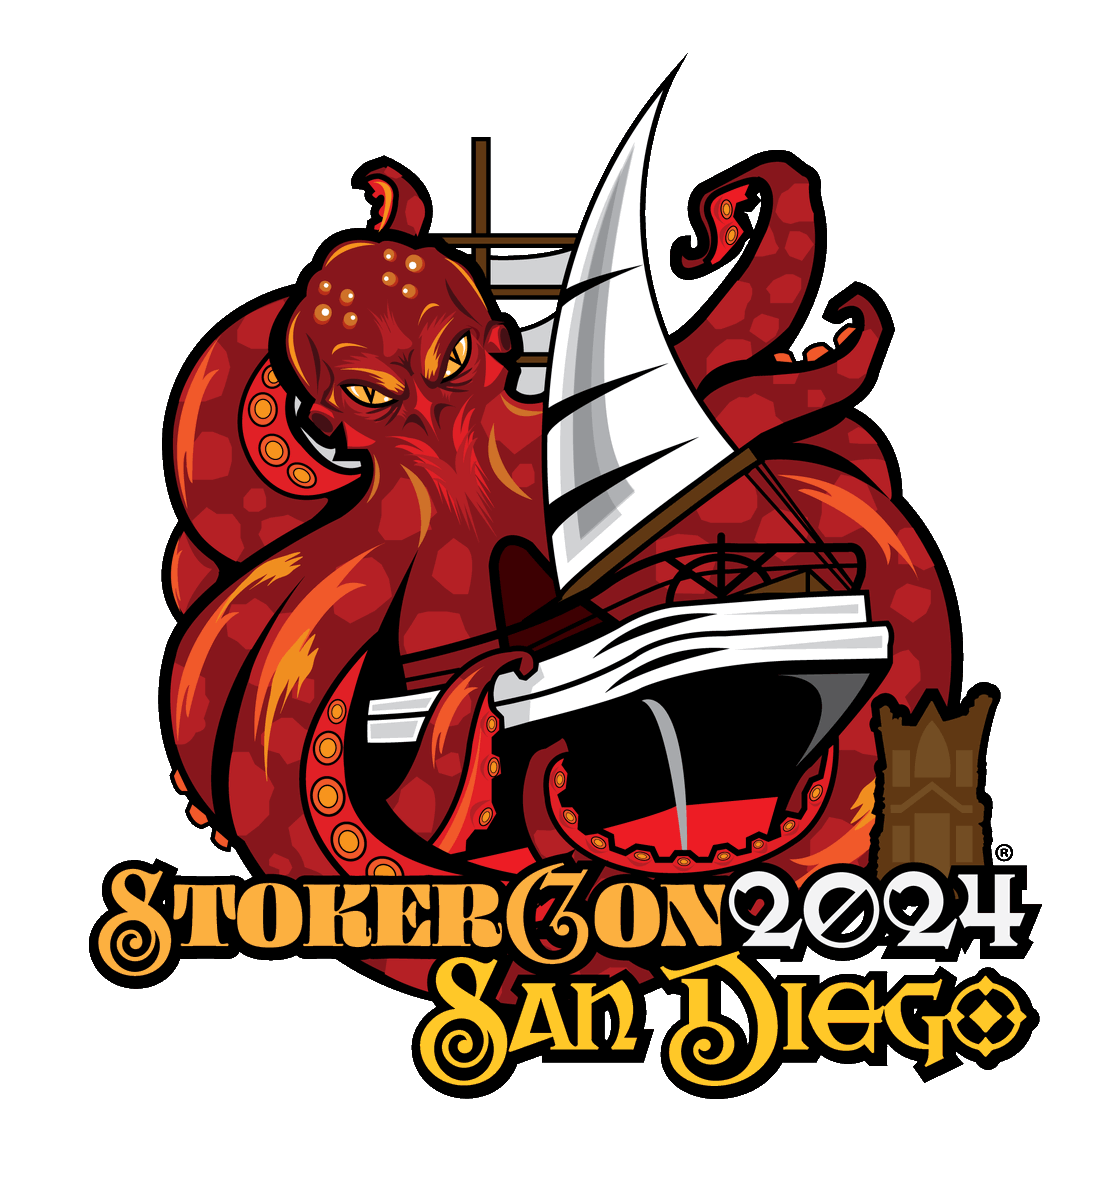 Registration for #Stokercon2024 in San Diego is still open! This premiere horror literary convention presented by the HWA offers panels, workshops, readings, signings, films, a banquet & much more. Details: stokercon2024.com #Stokercon